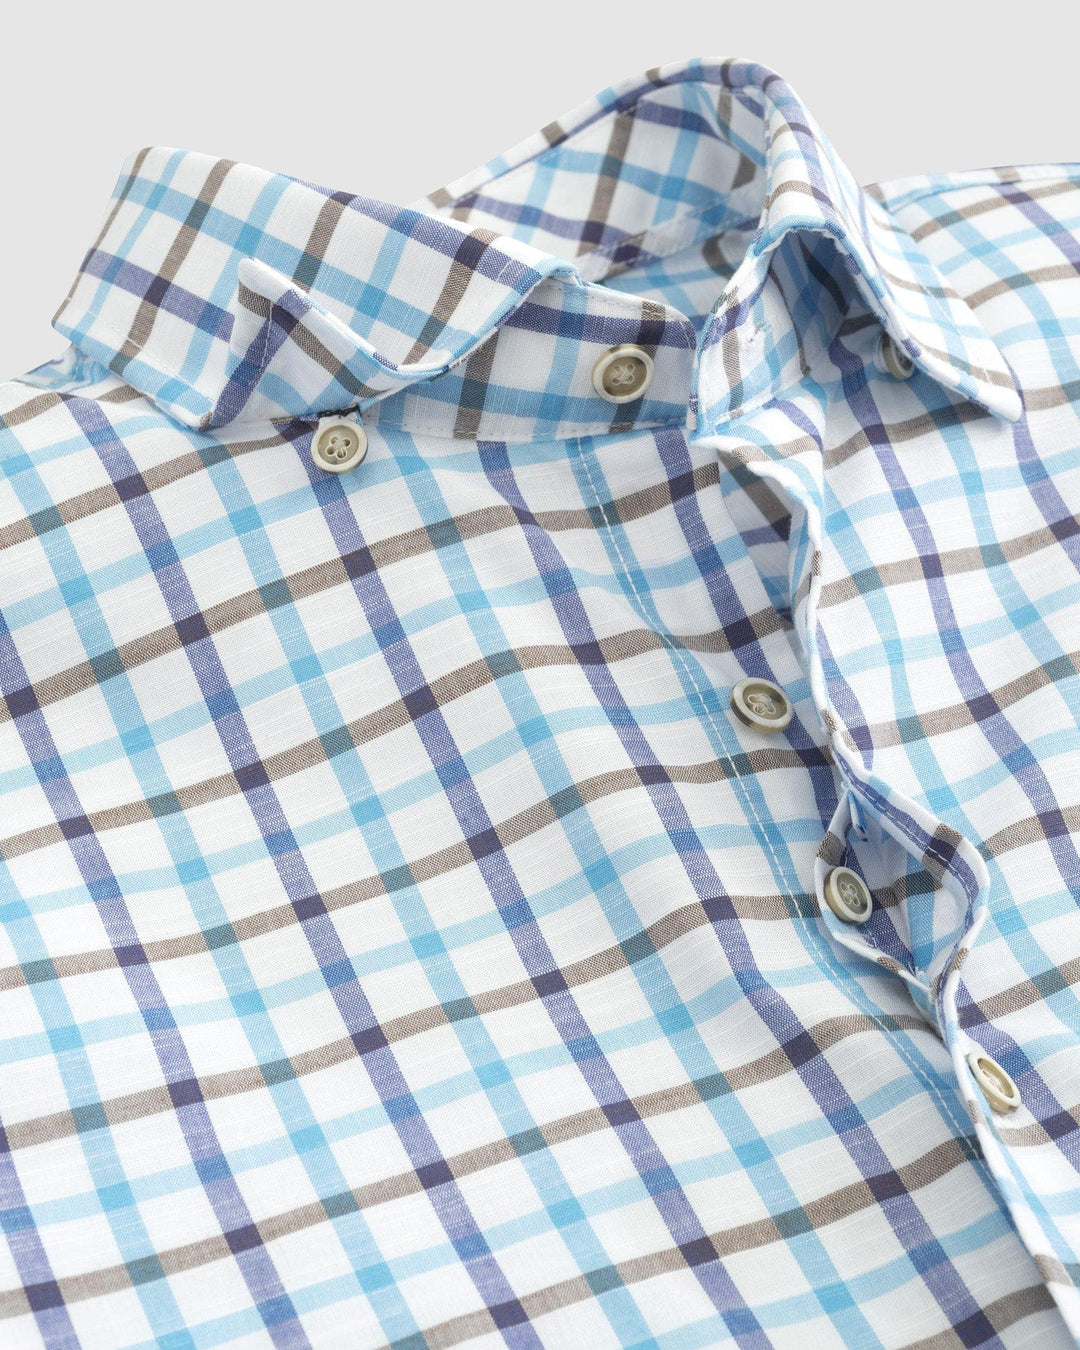 Johnnie-O Mardy Hangin' Out Button Up Shirt